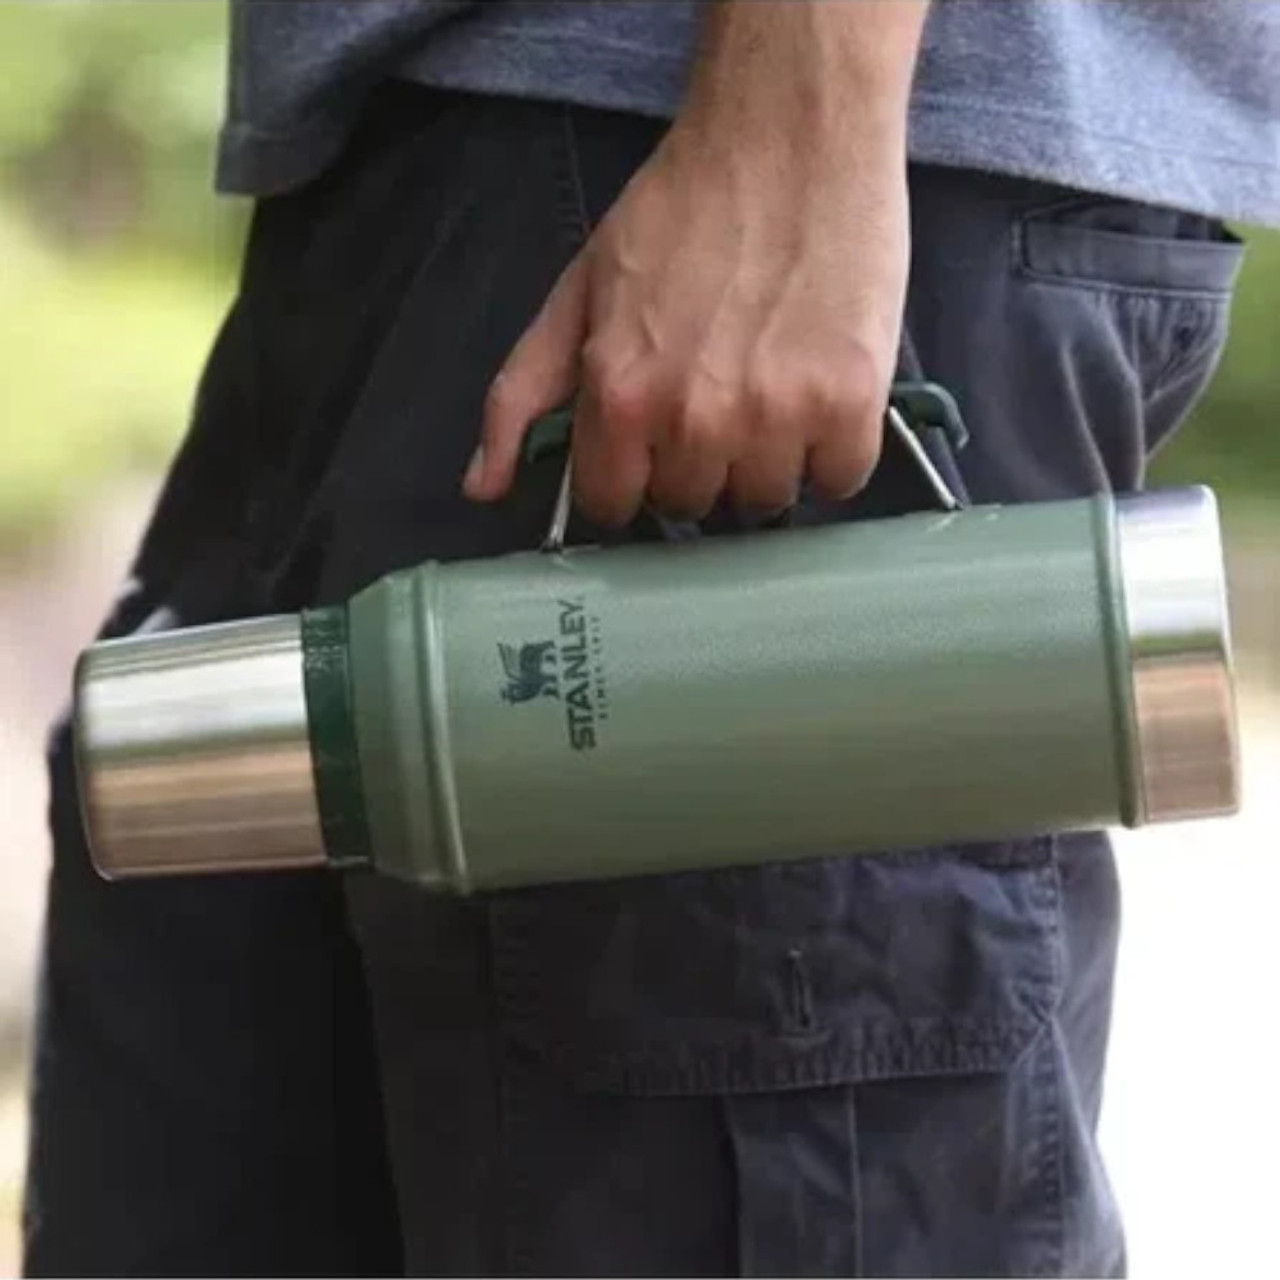 https://cdn11.bigcommerce.com/s-3stx4pub31/images/stencil/1280x1280/products/9358/25913/kyma-stanley-thermos-950-verde-4__98617.1696019772.jpg?c=2?imbypass=on